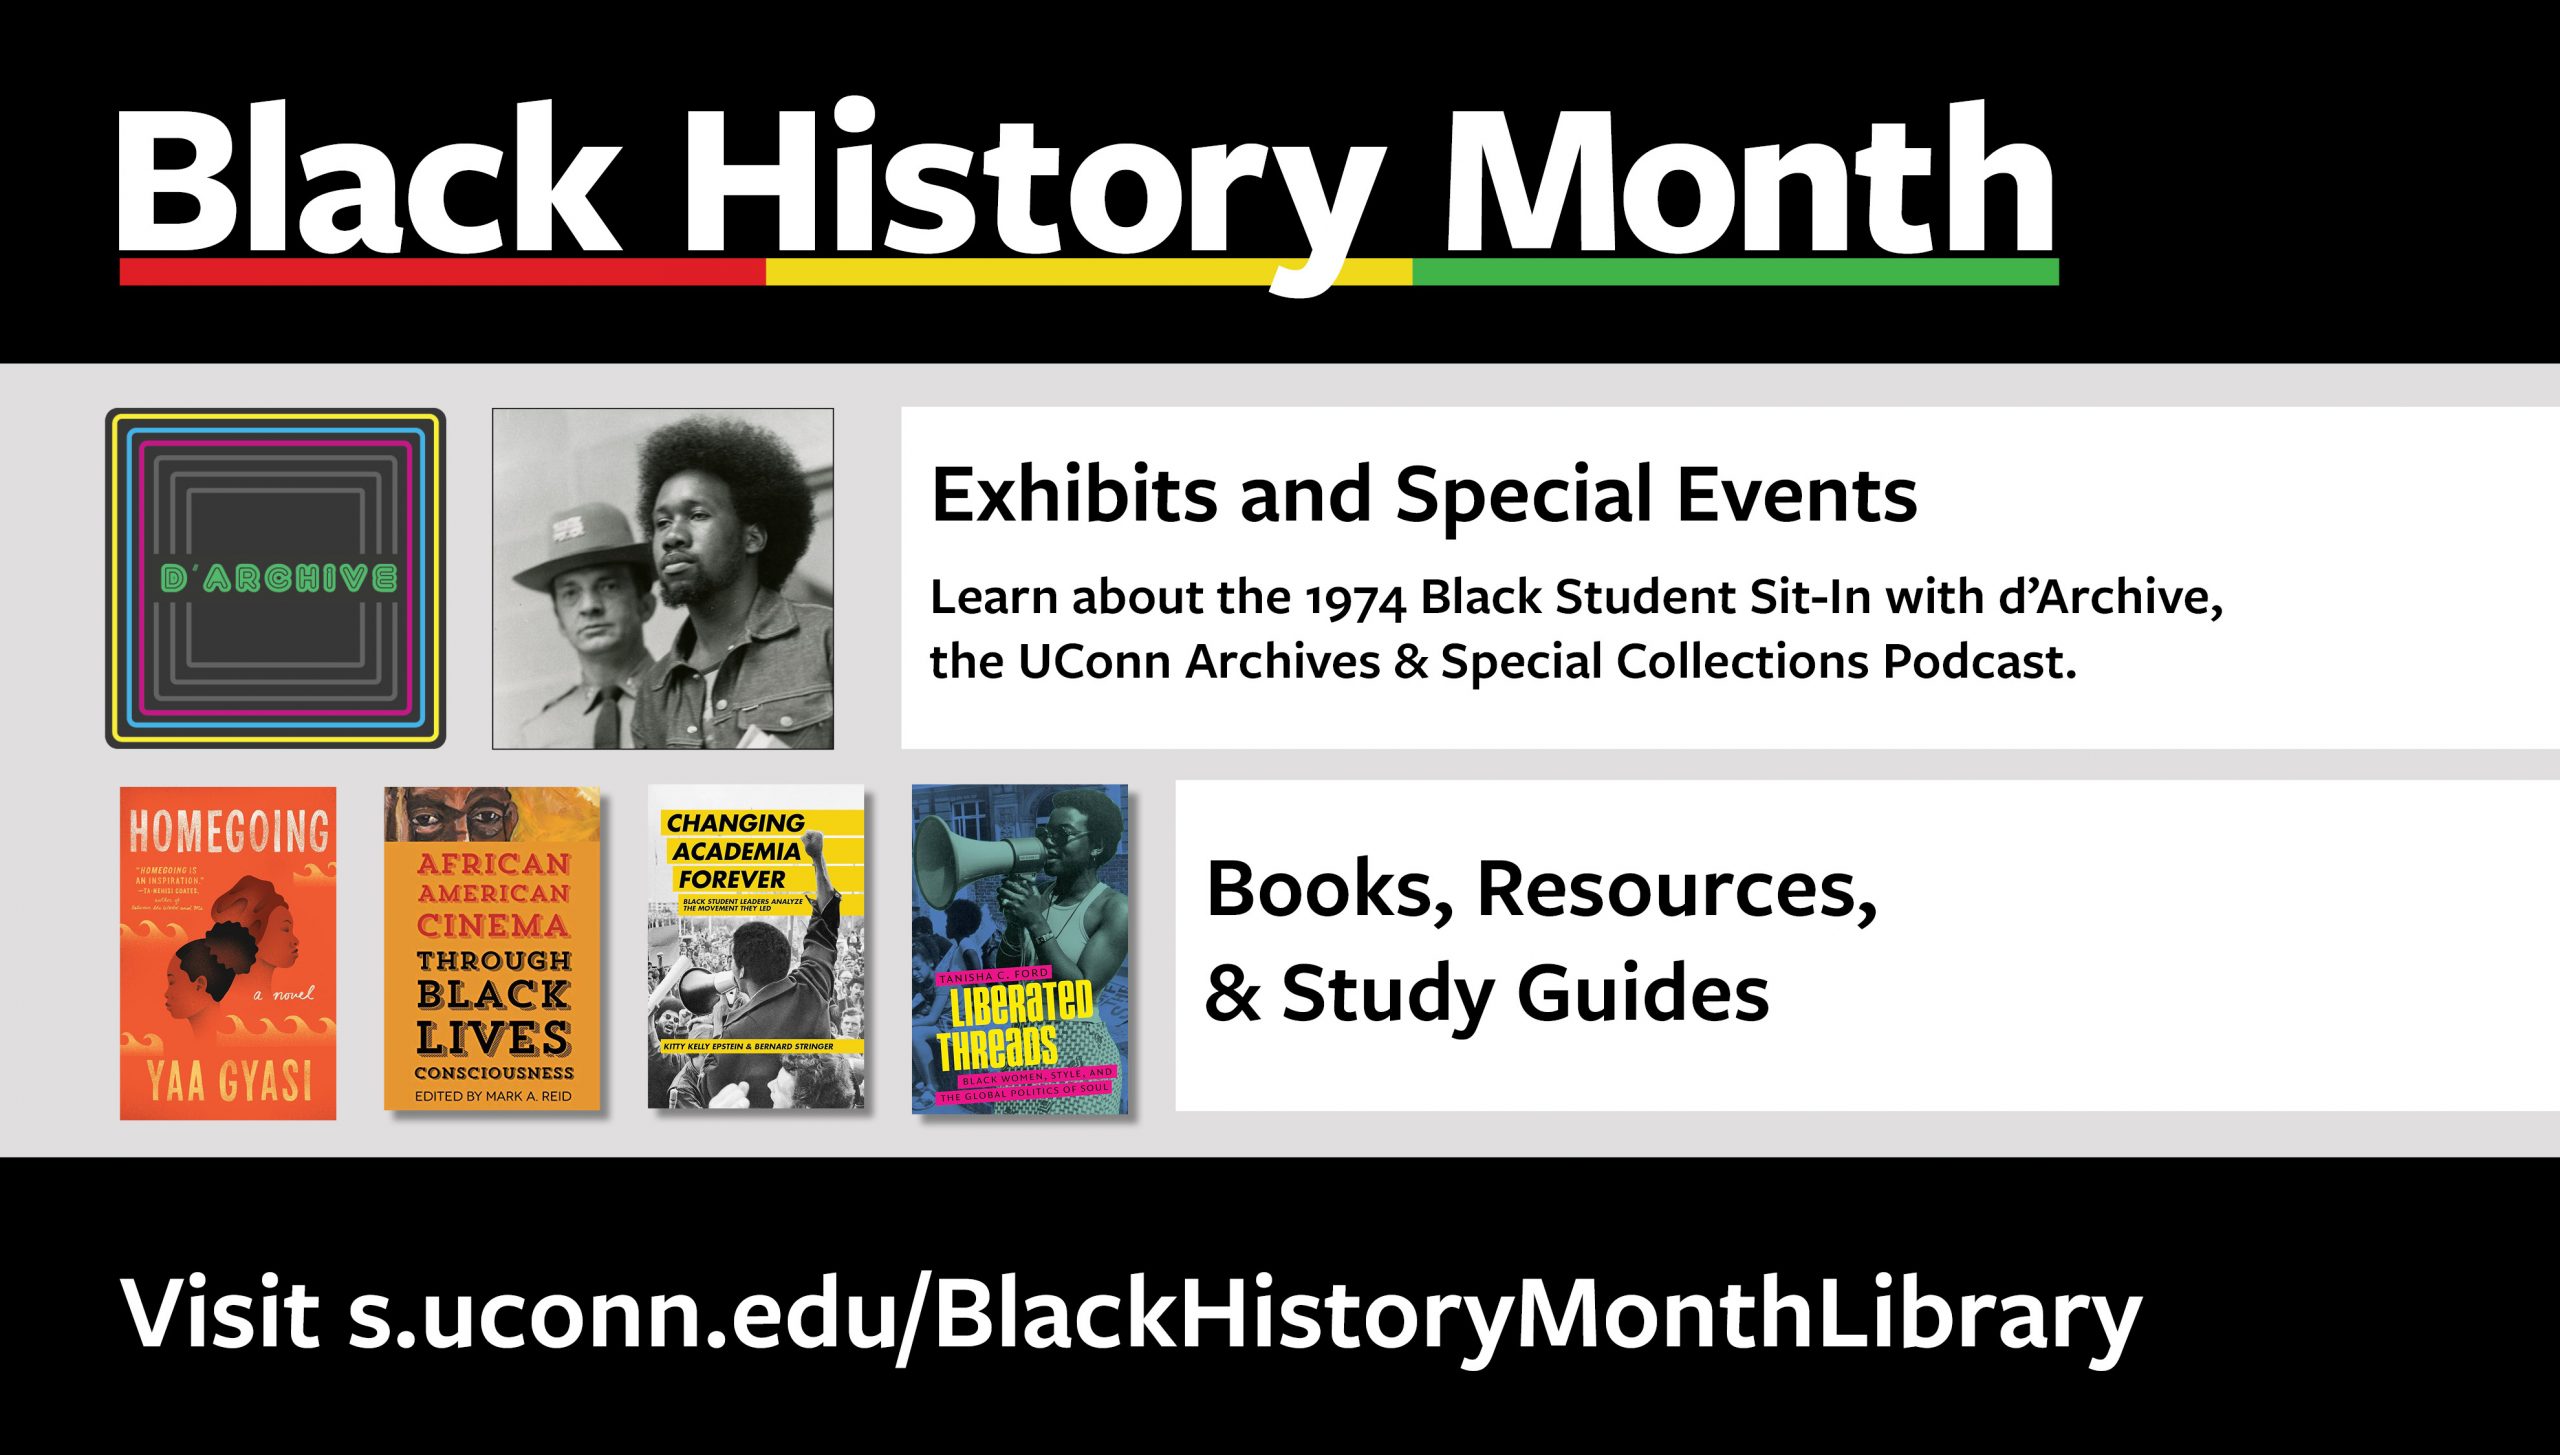 White text on black background "Black History Month" with red, yellow and green underline. Gray background with d'Archive podcast logo and image of a black male student being calmly escorted by a state trooper. Black text on white background: "Exhibits and Special Events. Learn about the 1974 Black Student Sit In." Beneath, a collection of book covers relating to black culture and history. "Books, resources & study guides." Visit s.uconn.edu/BlackHistoryMonthLibrary.